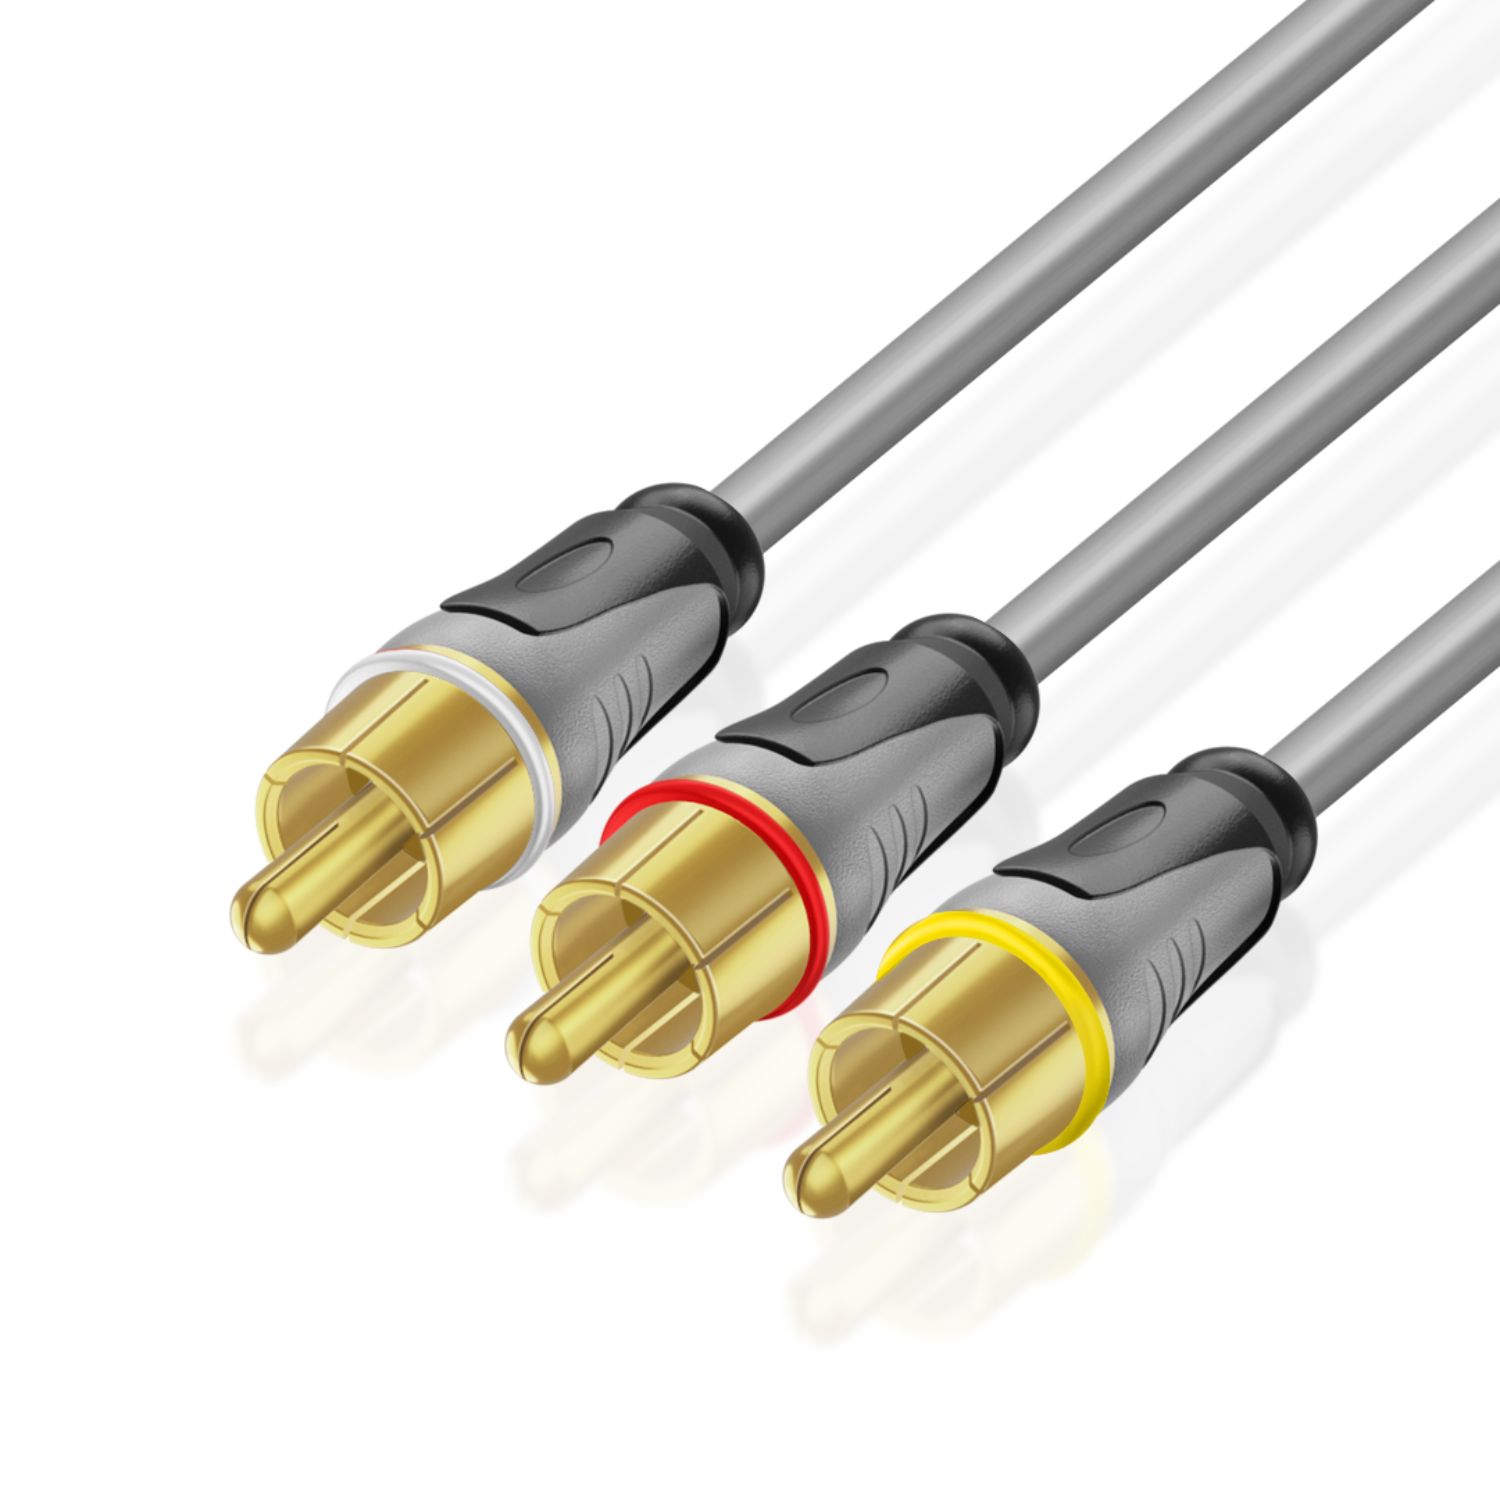 Premium 3 RCA Cable (50 FT) - 3RCA AV RCA Composite Video + 2RCA Stereo Audio M/M Male to Male Gold Plated  RCA Connector Plug Jack Wire Cord - image 1 of 6